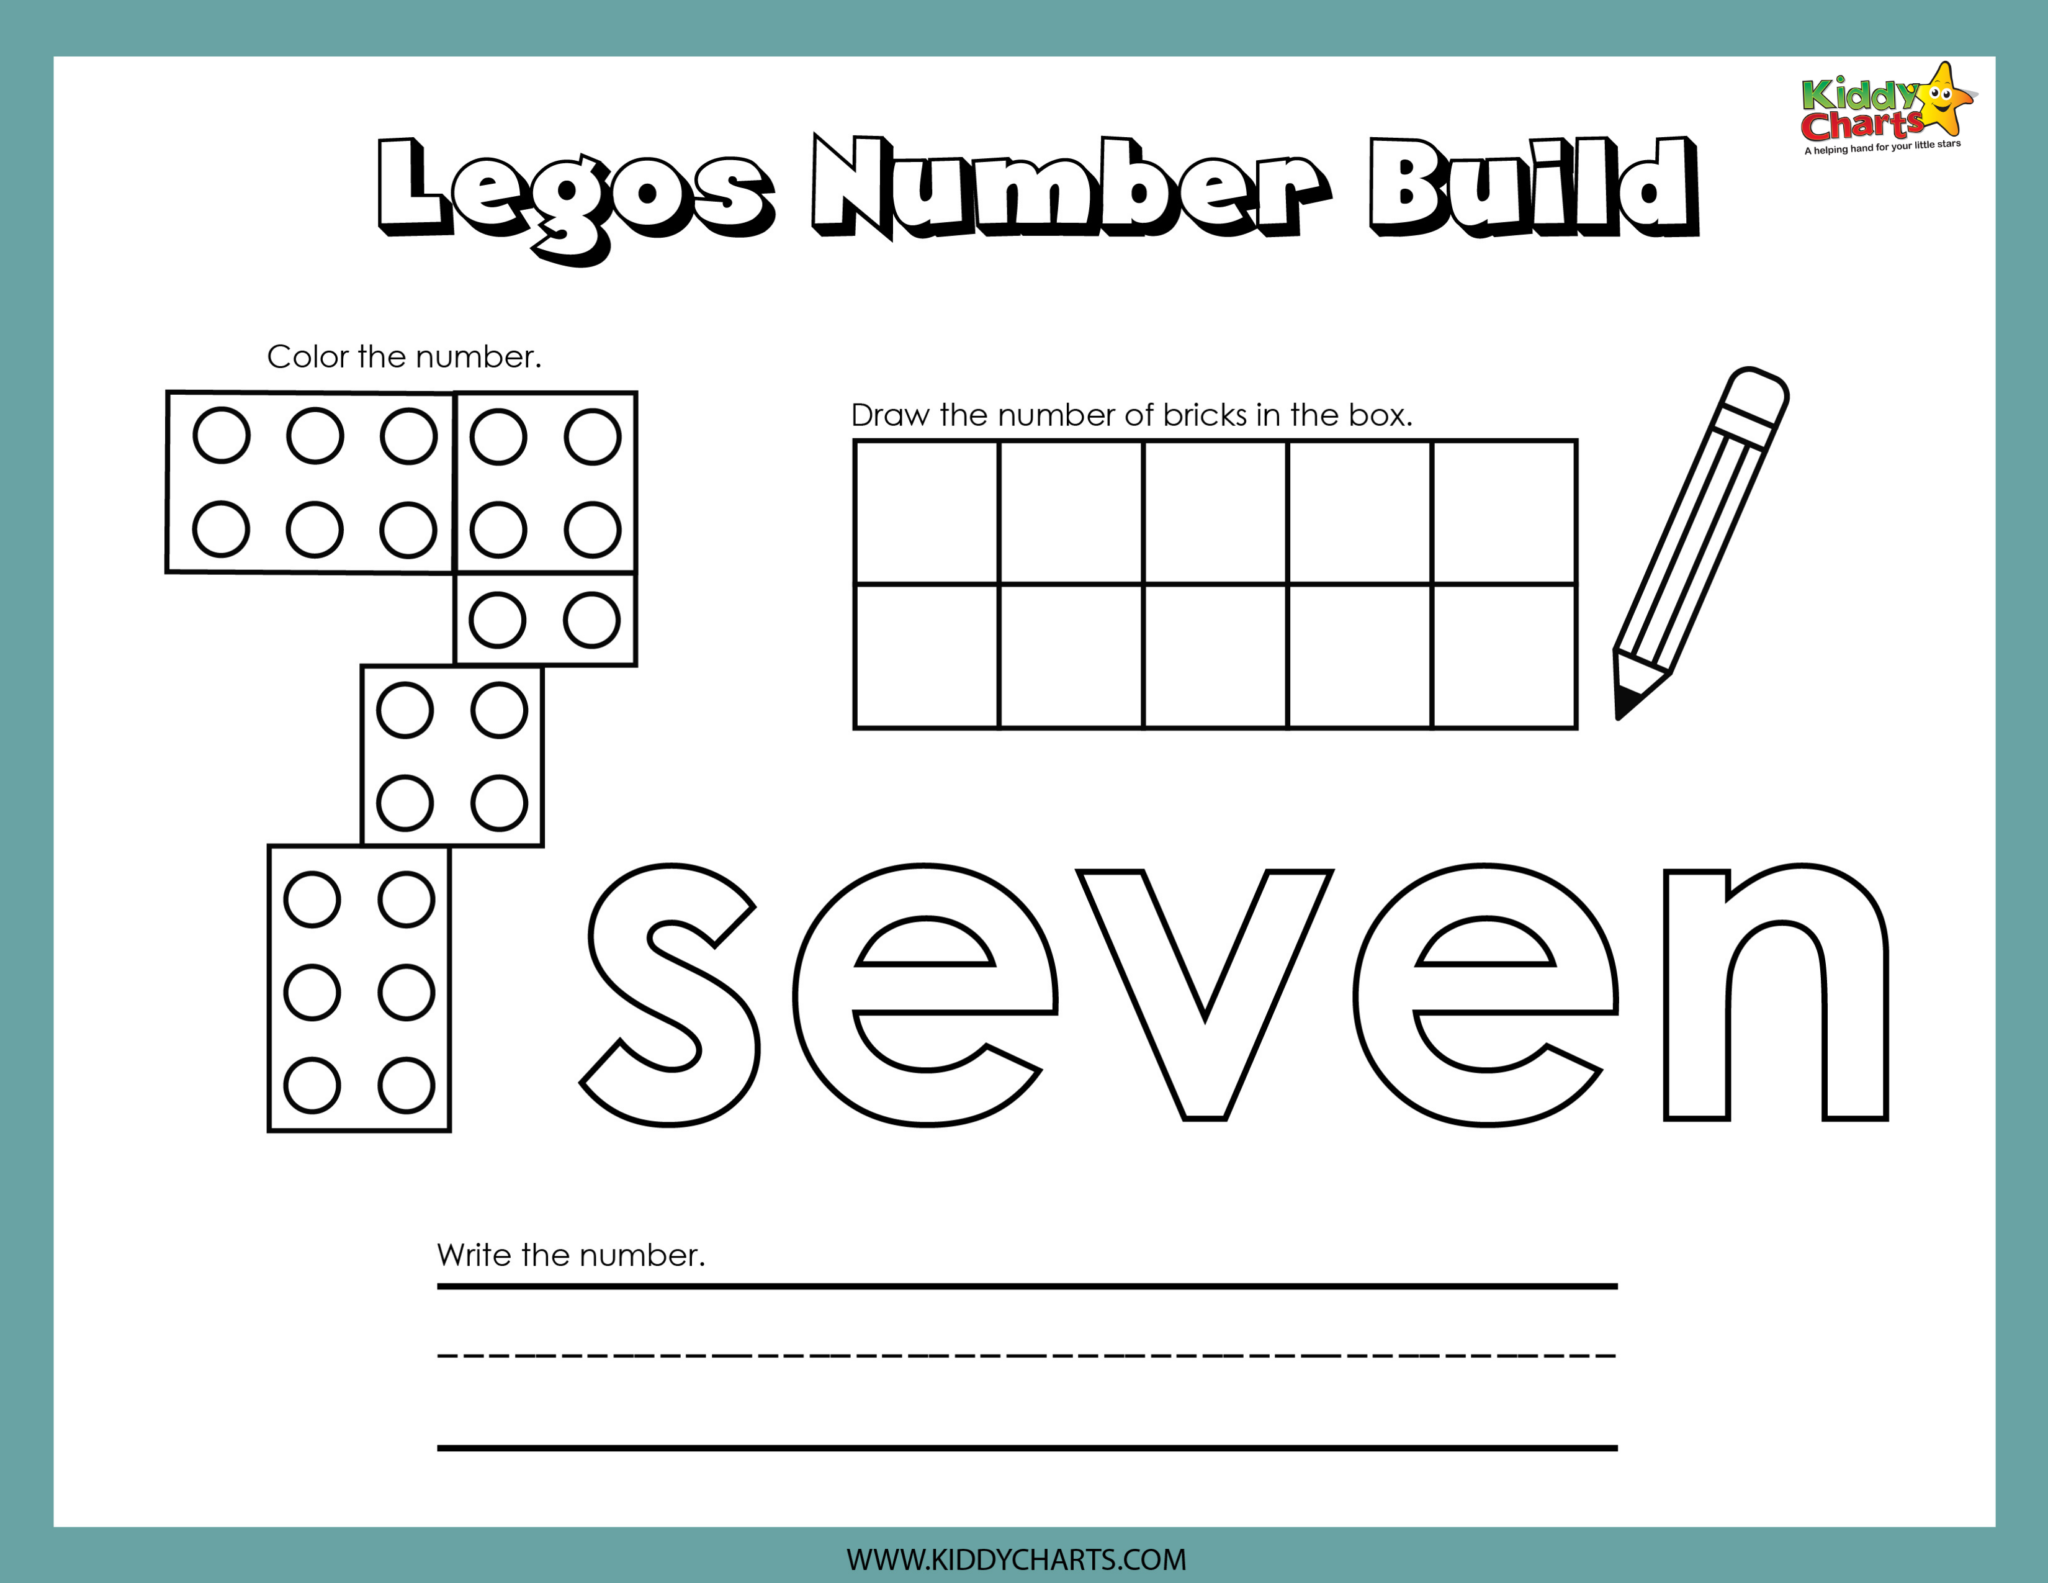 Lego Numbers Building Activity Printable Maths Kiddycharts